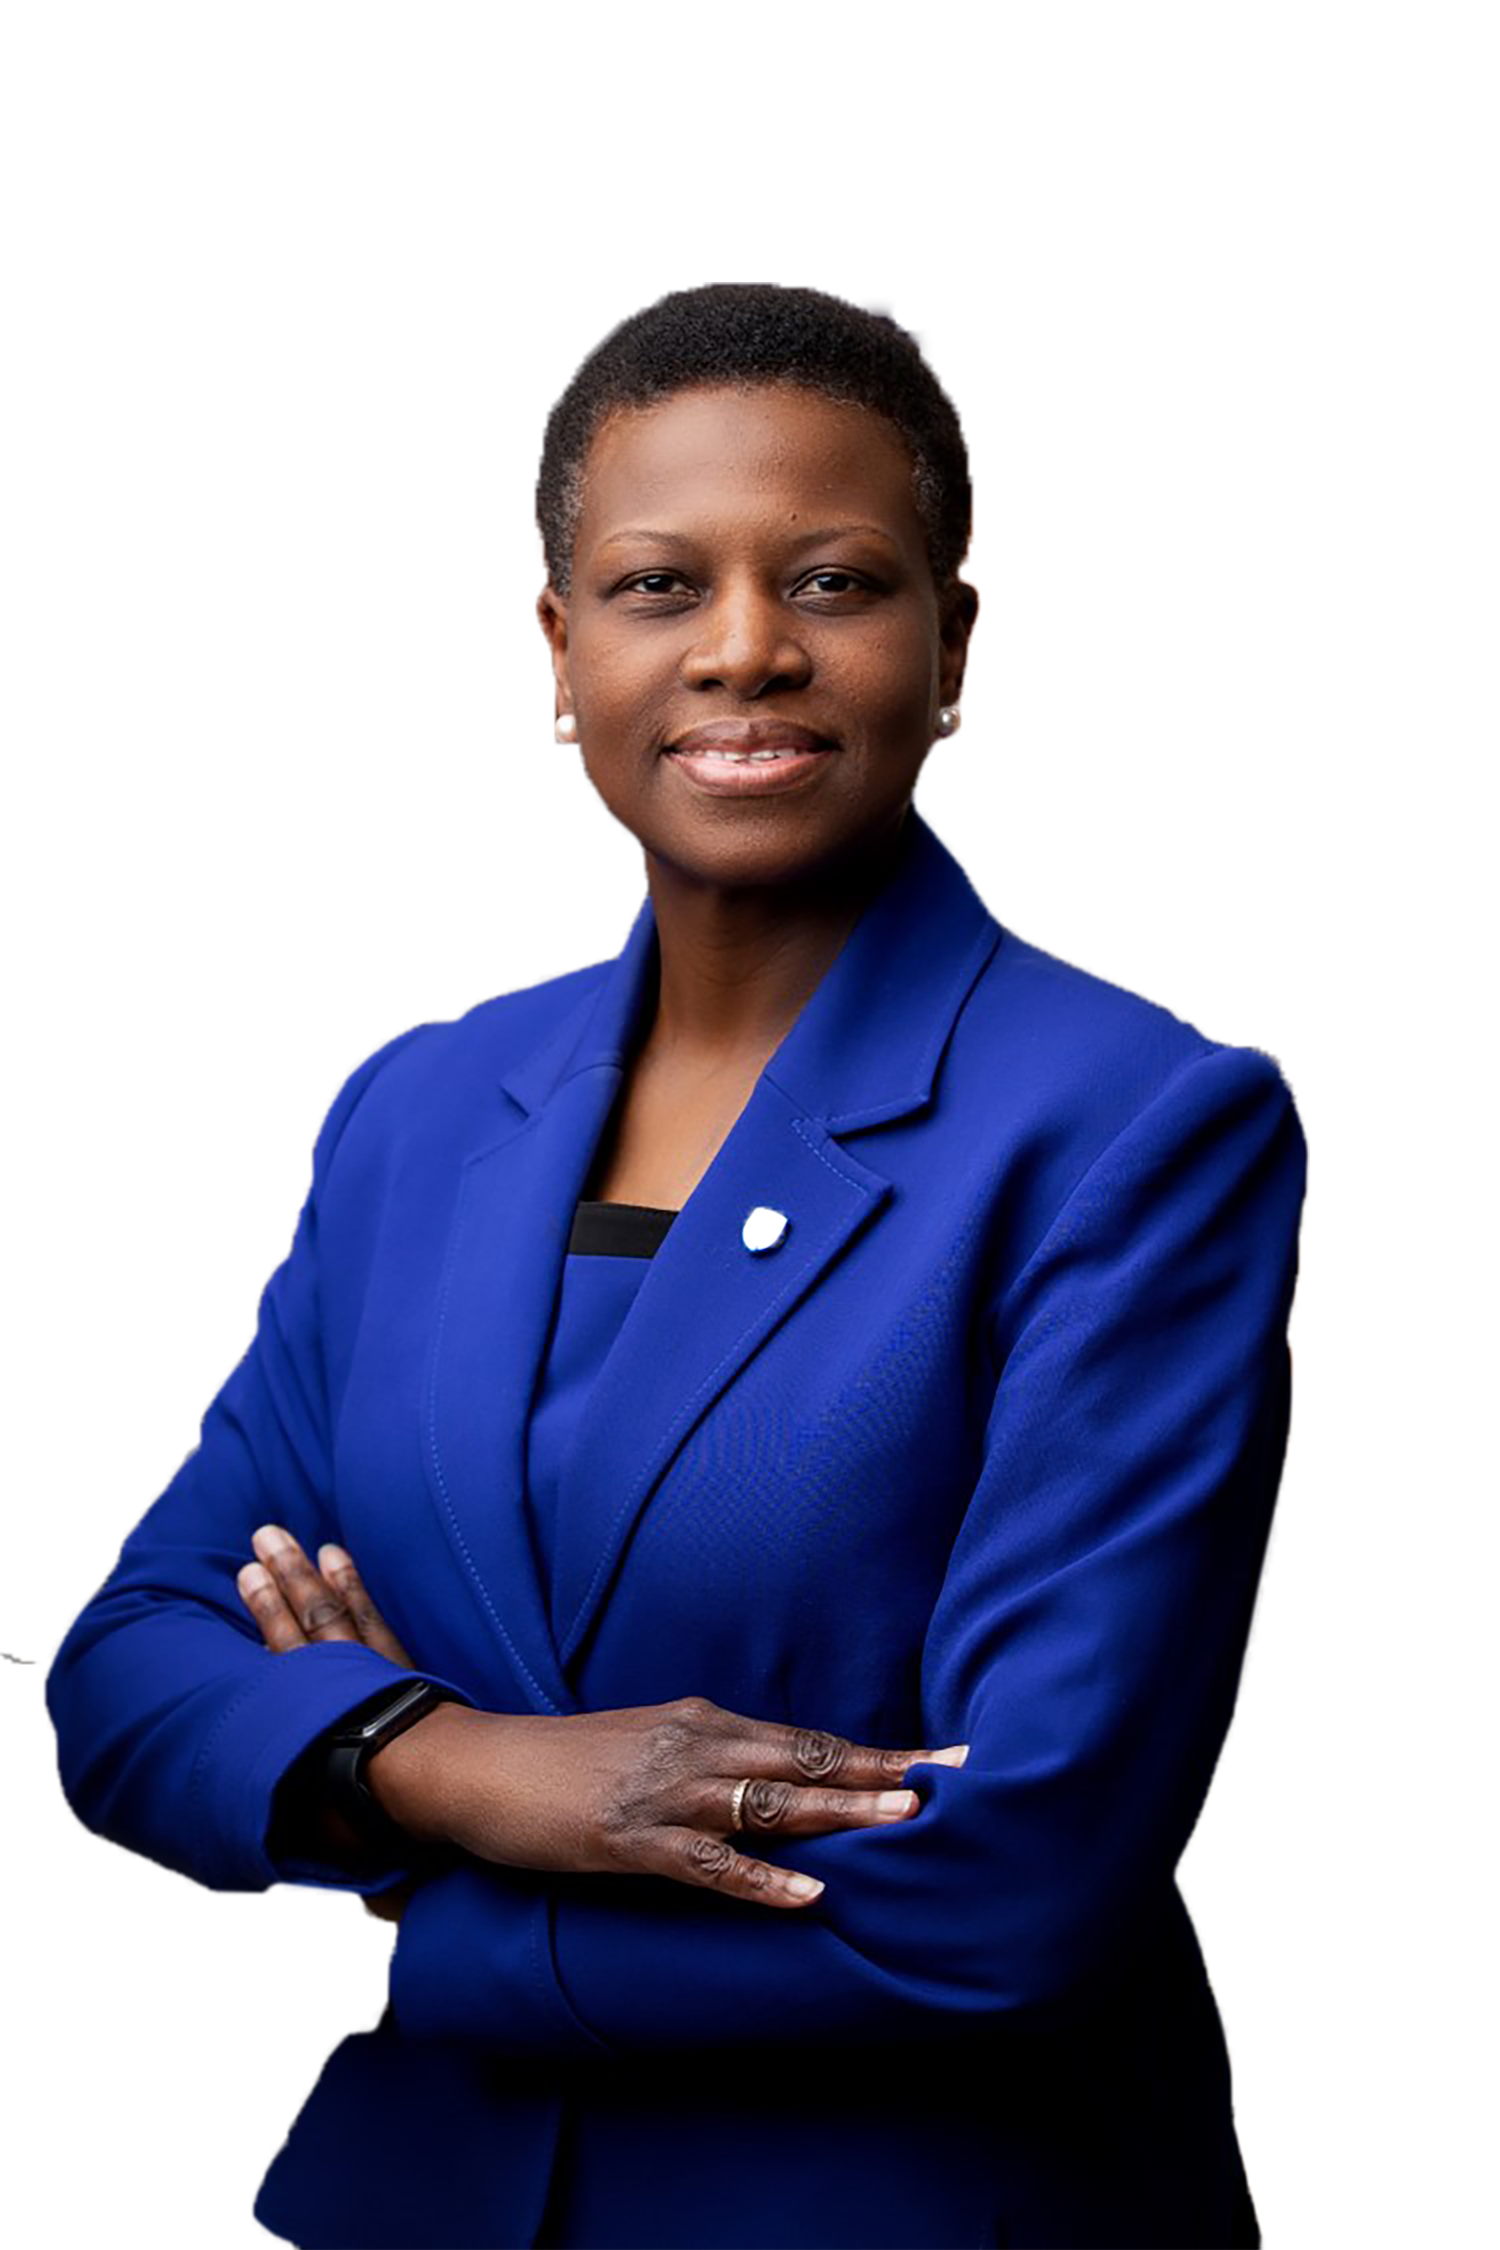 Sola David-Borha is Chief Executive of Africa Regions at Standard Bank Group